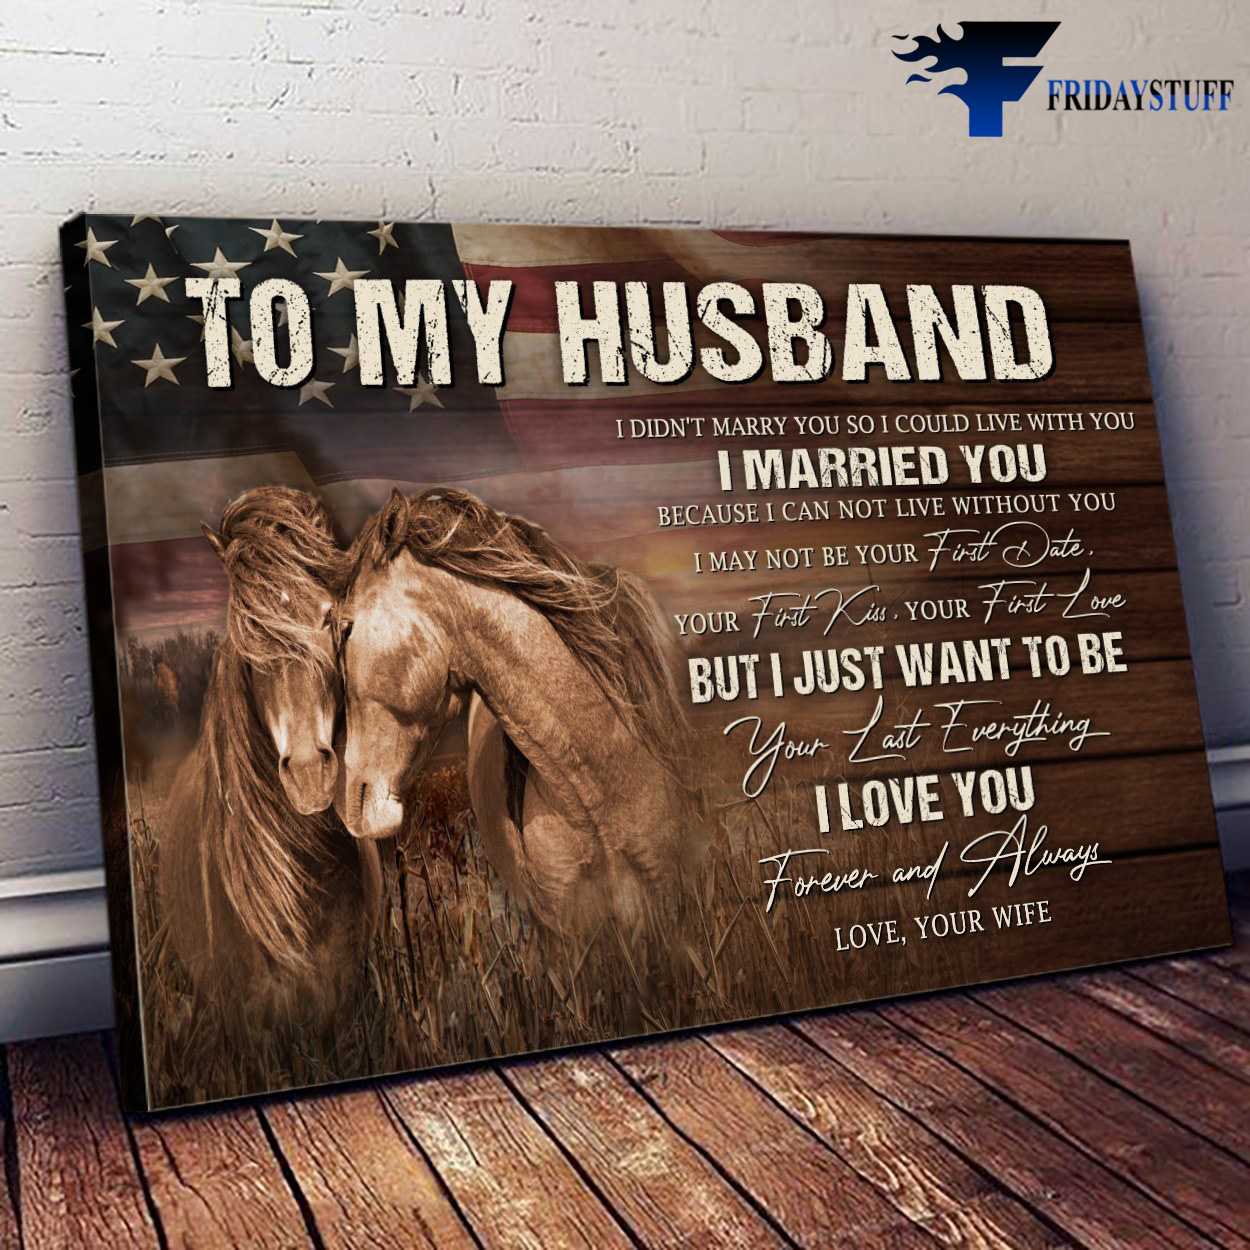 Horse Poster, American Horse, To My Husband, I Didn't Marry You So I Could Live With You, I Married You Because I Can Not Live Without You, I May Not Be Your First Date